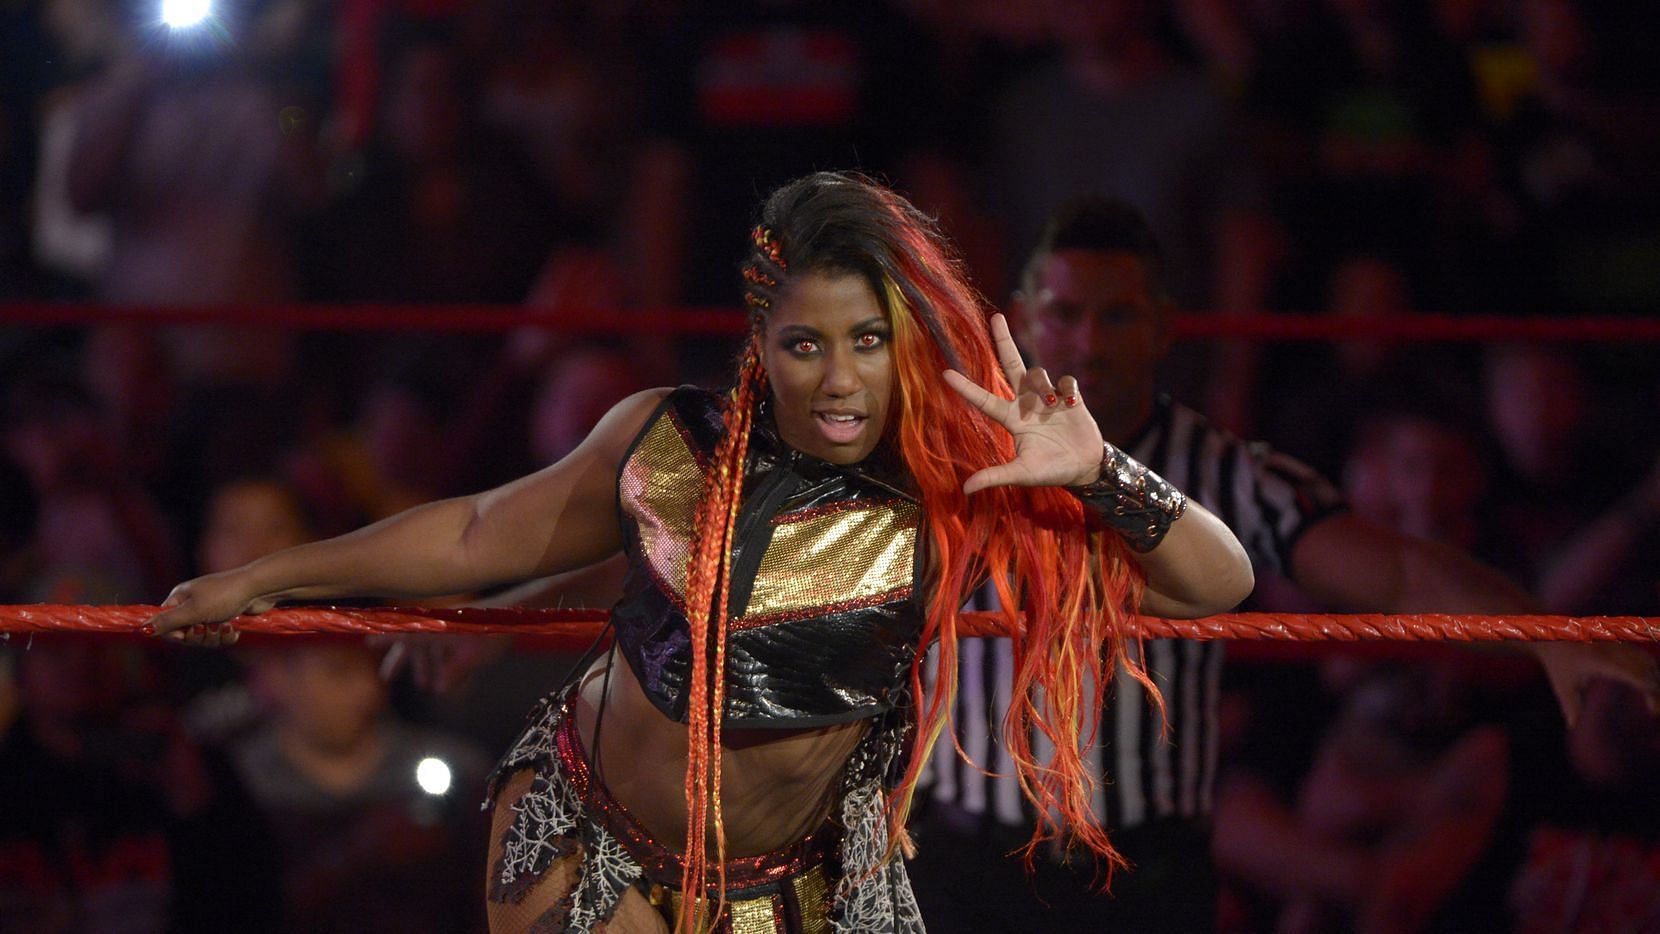 Ember Moon is back and better than ever